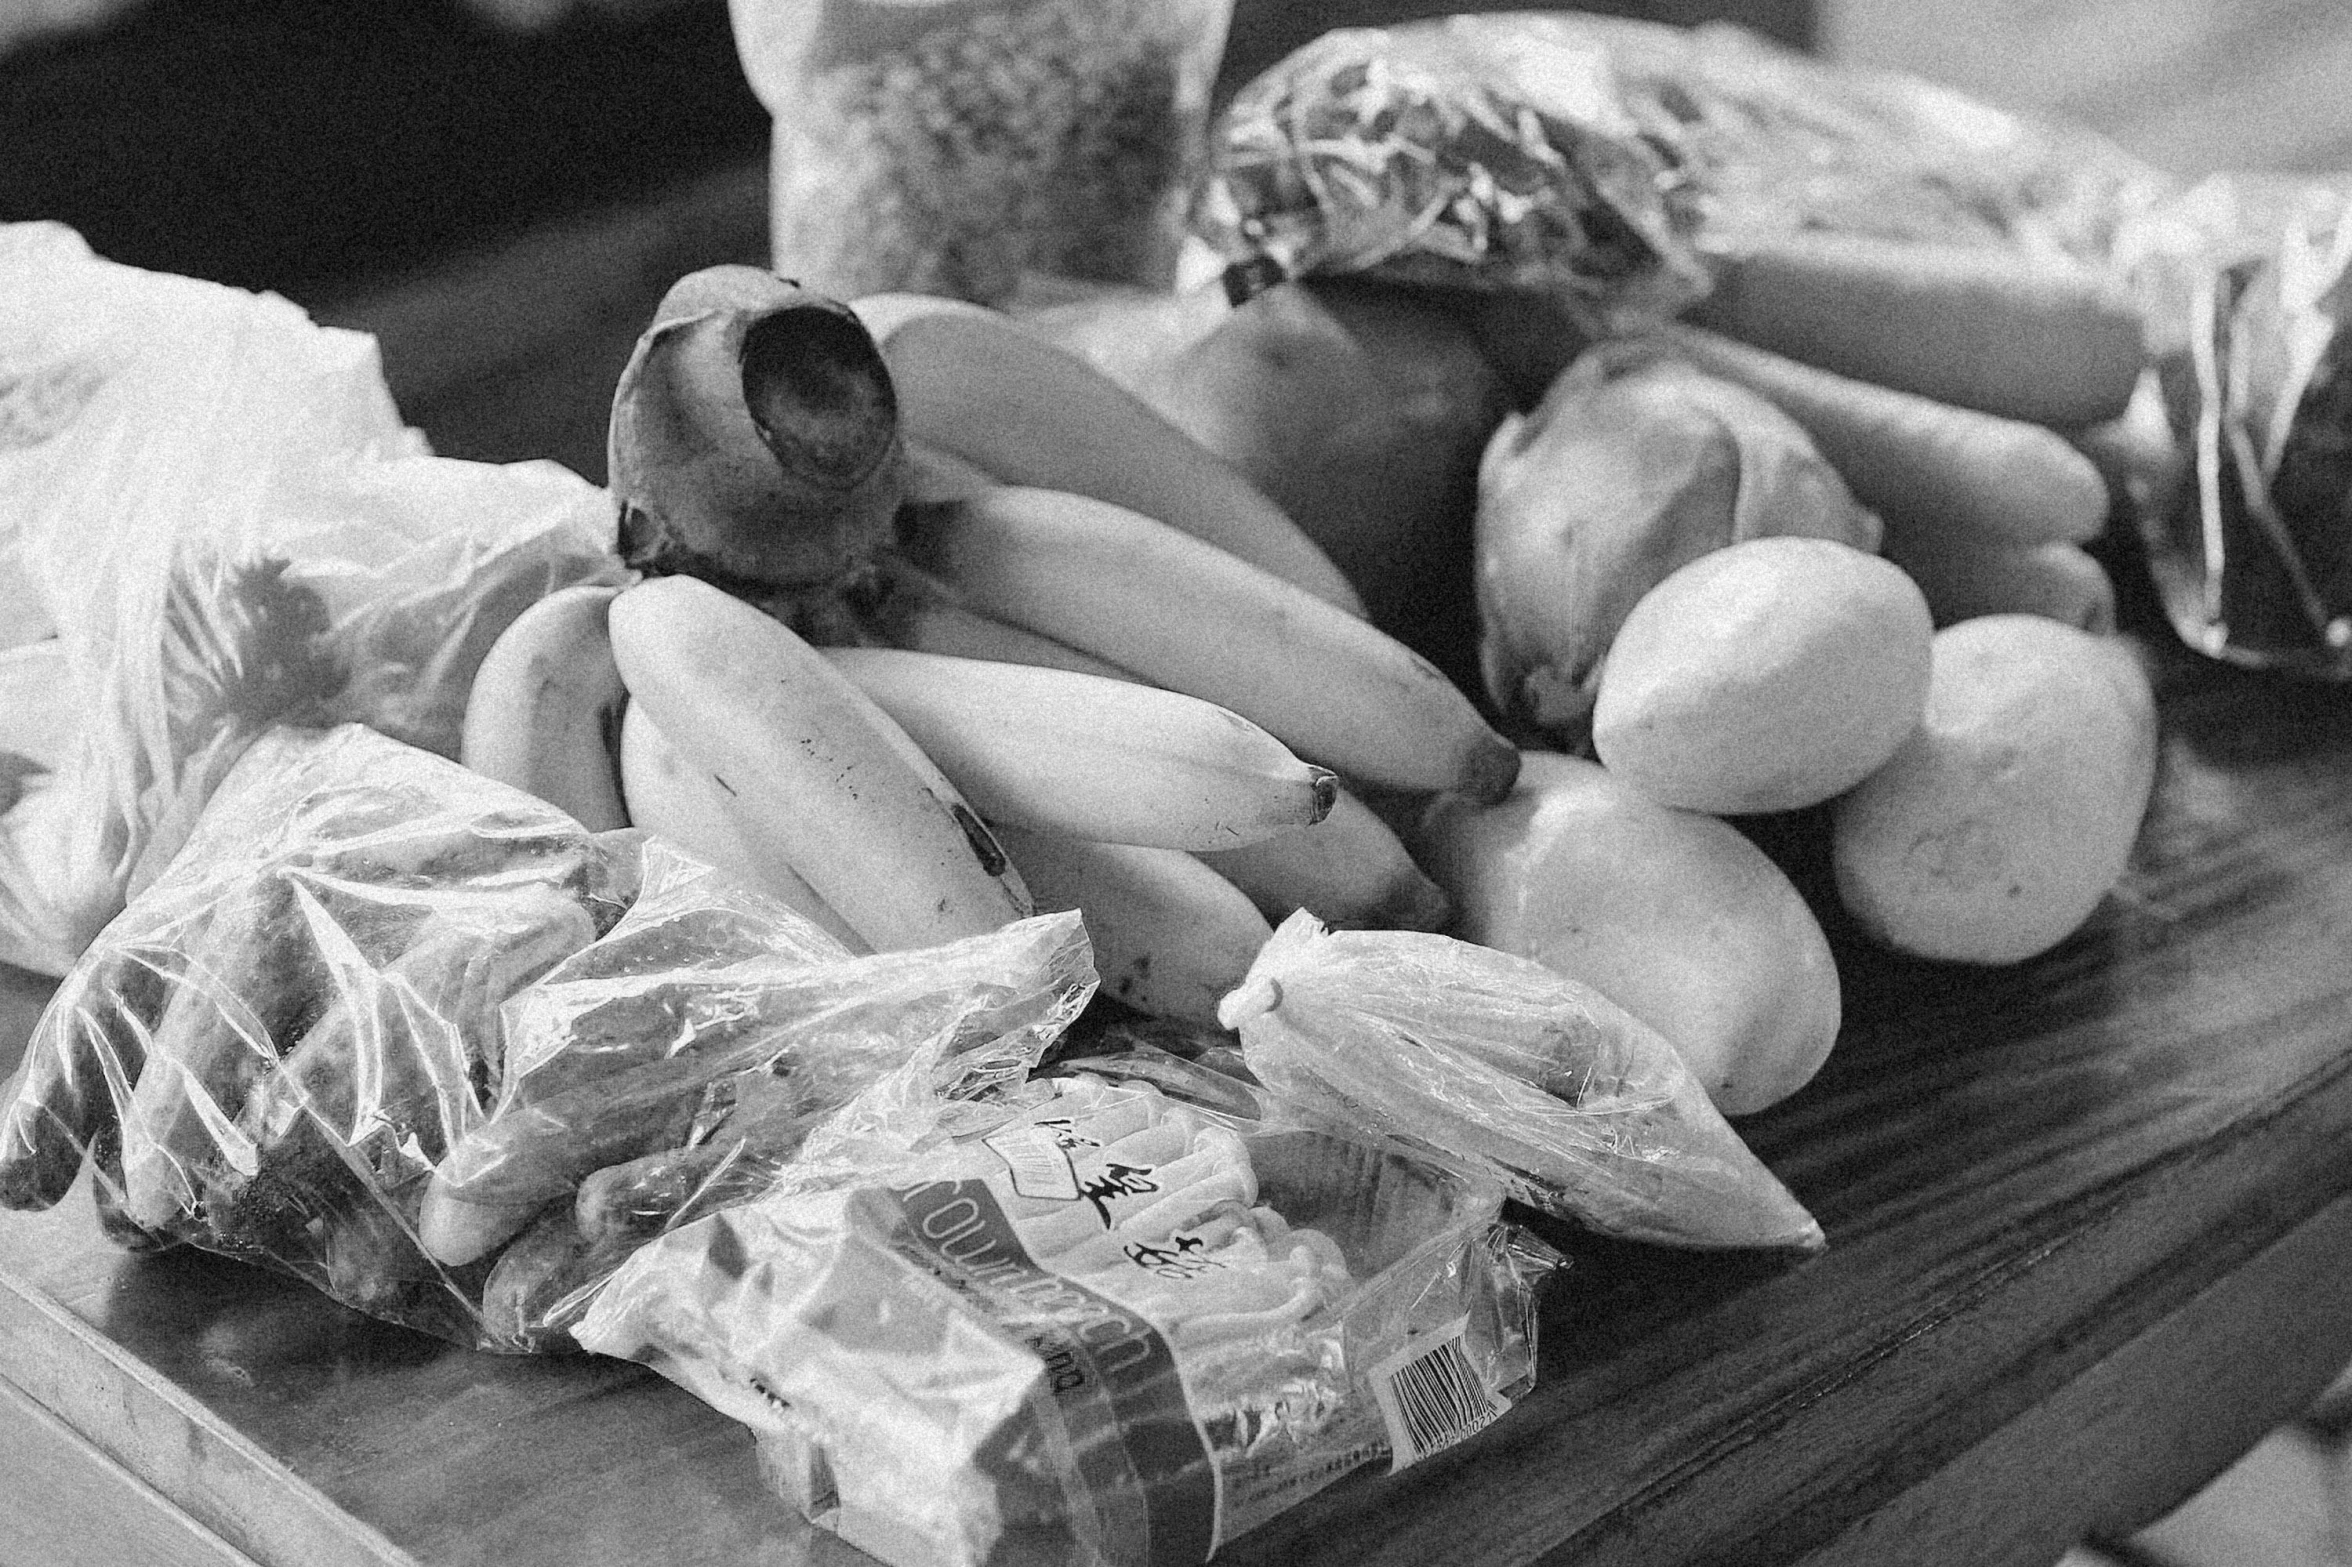 a bunch of bananas are next to a bundle of dogs and potatoes